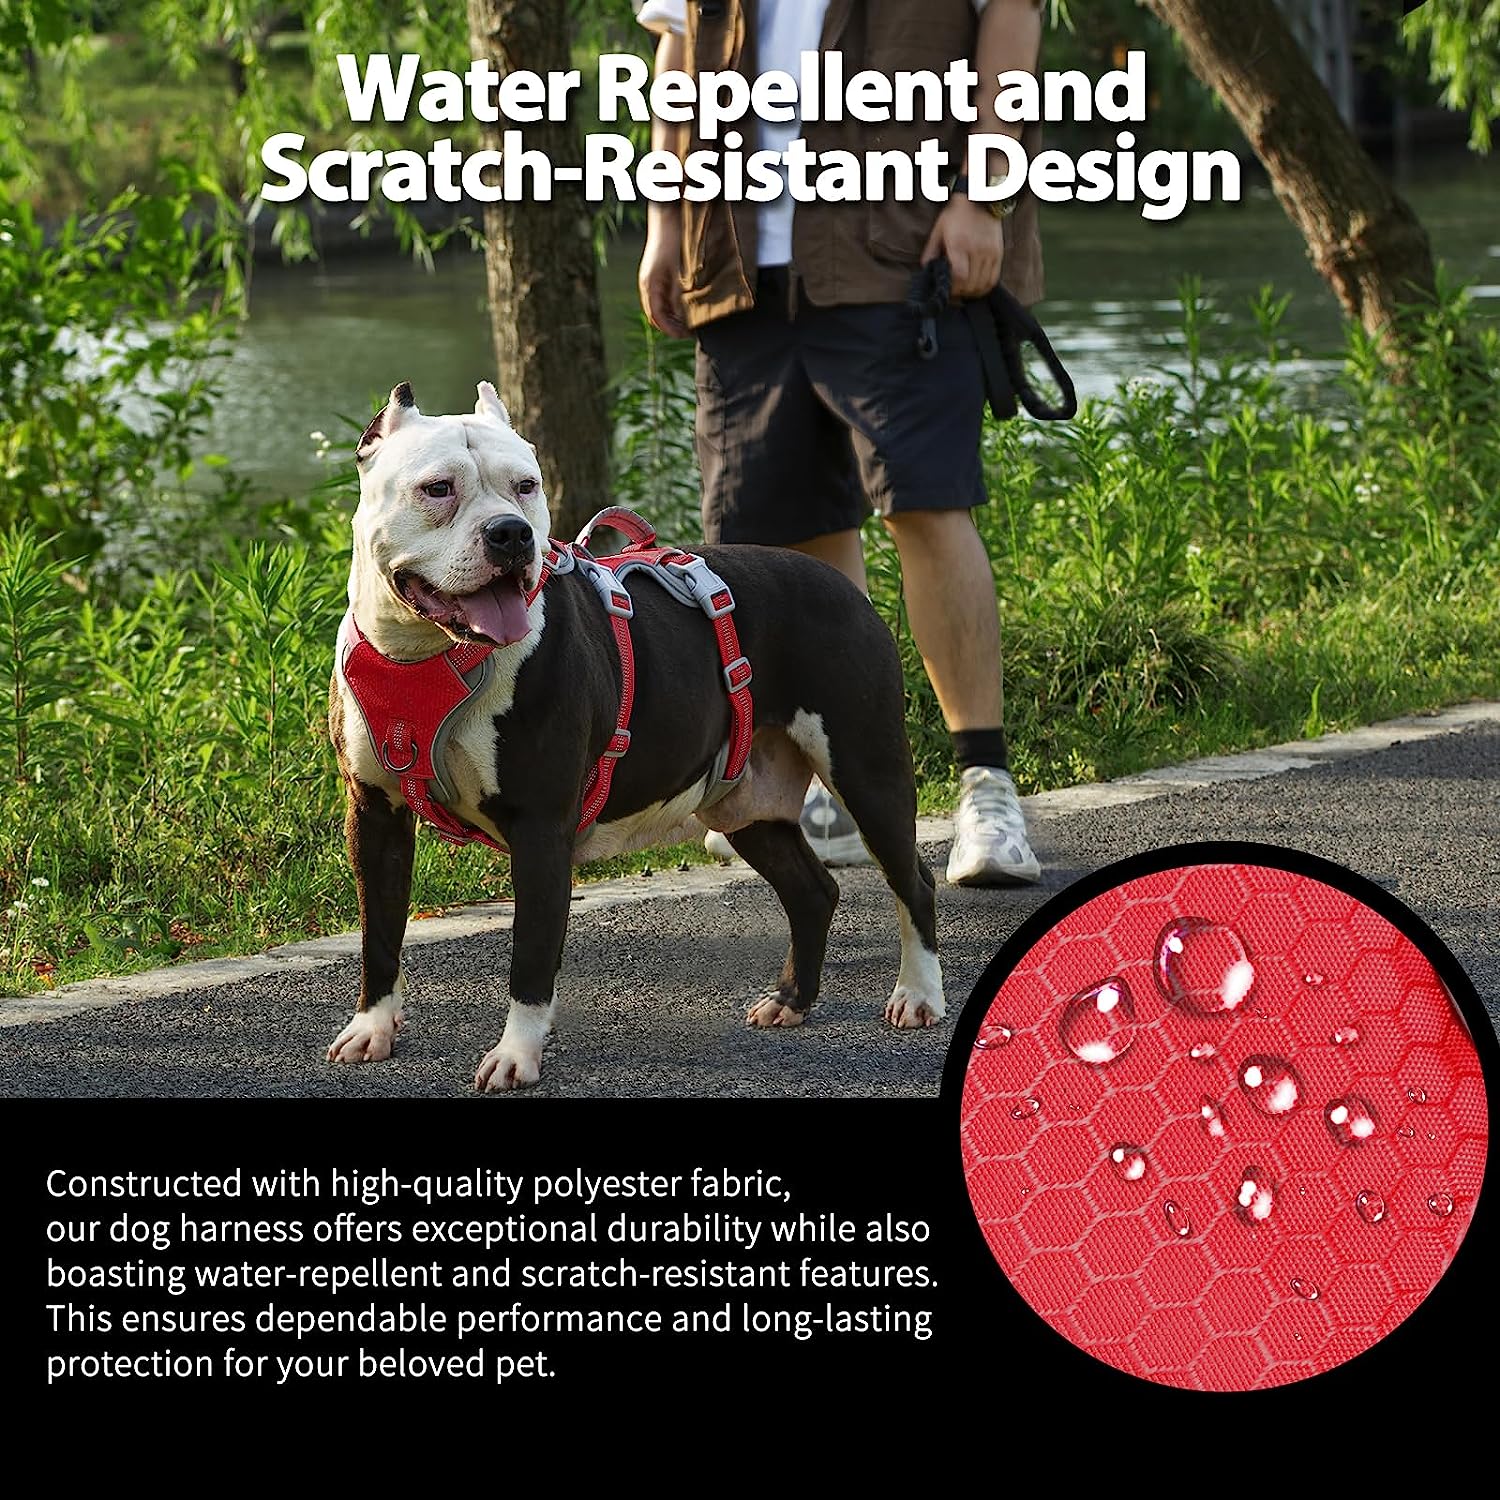 Escape Proof Dog Harness and Water-Repellent Dog Harness Red